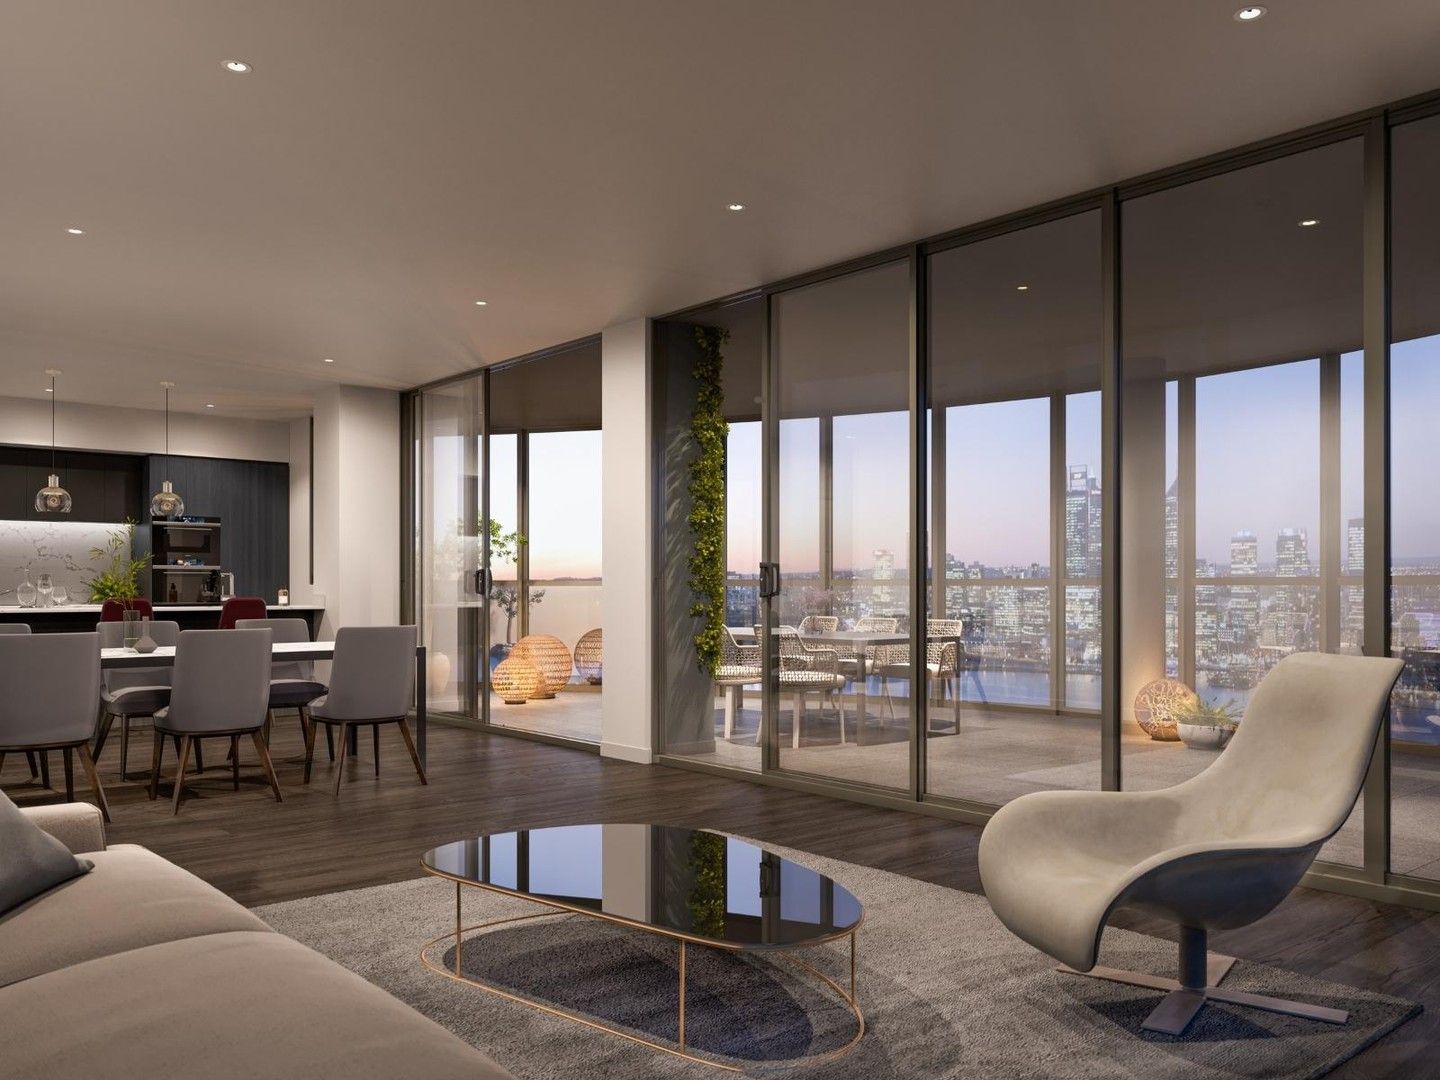 1 bedrooms New Apartments / Off the Plan in 216/3 Mends Street SOUTH PERTH WA, 6151